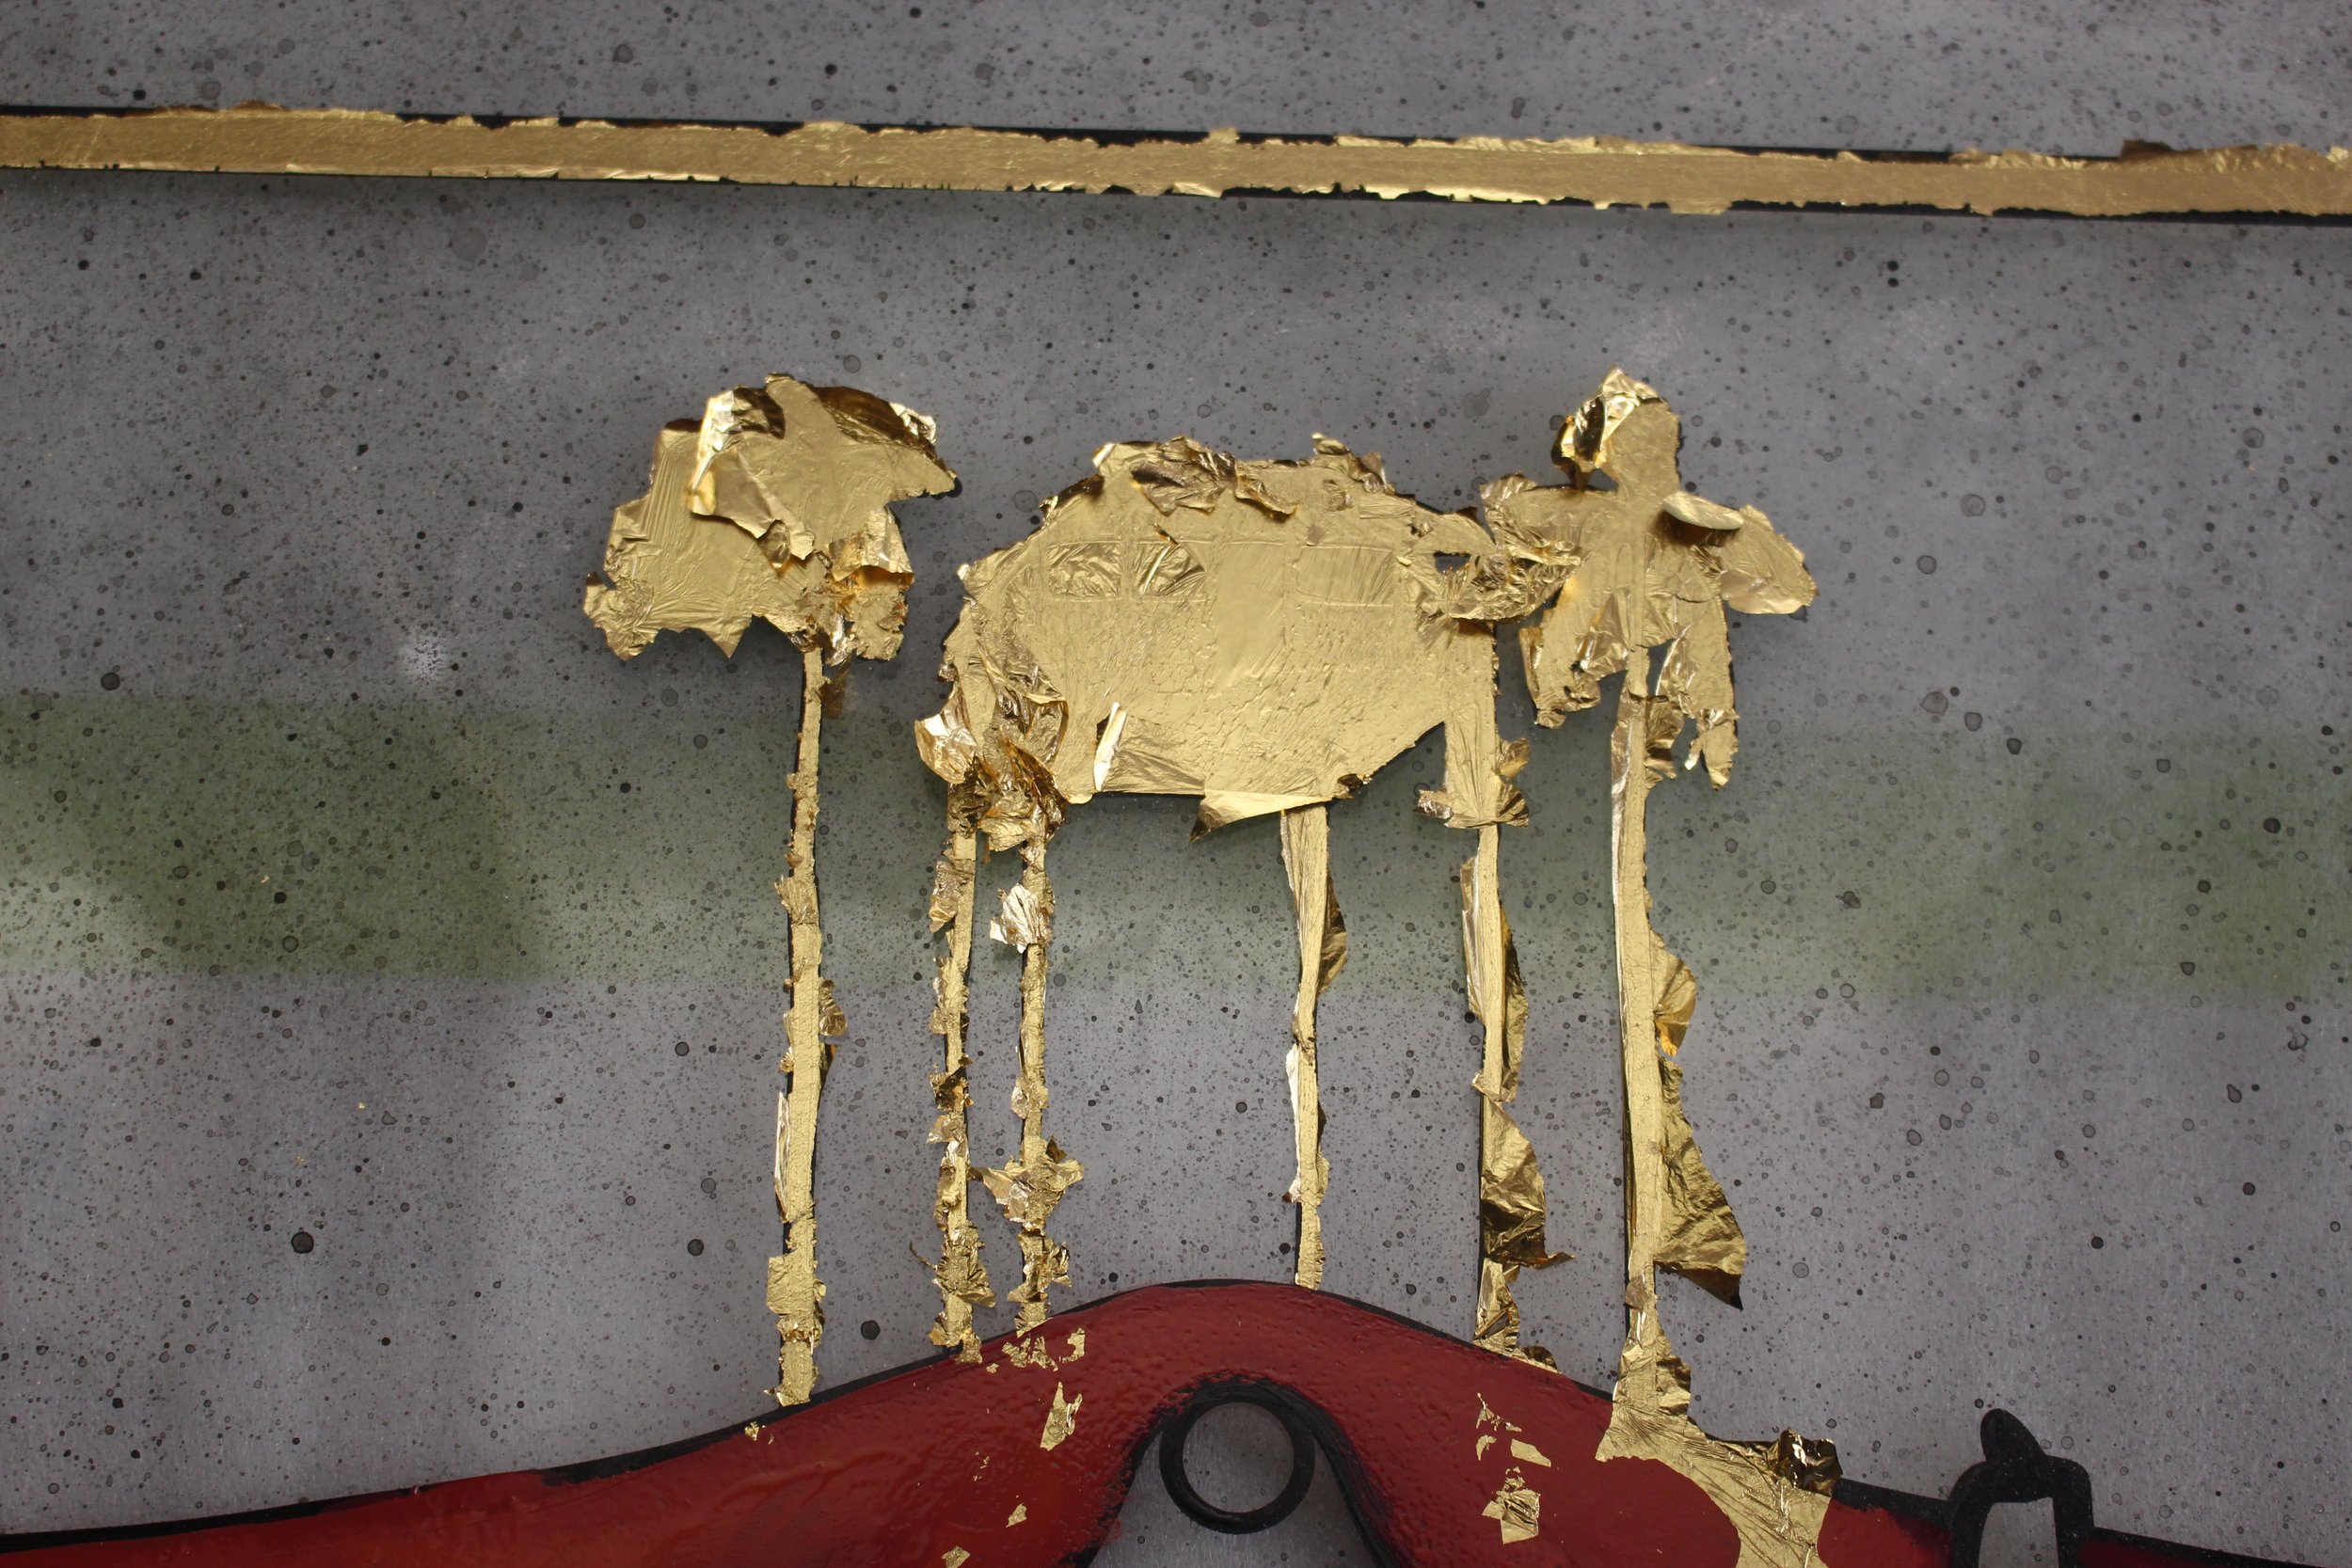  Gold leaf applied with an oil size on the reverse side of the glass.  Excess gold is removed once the gold size is dry 